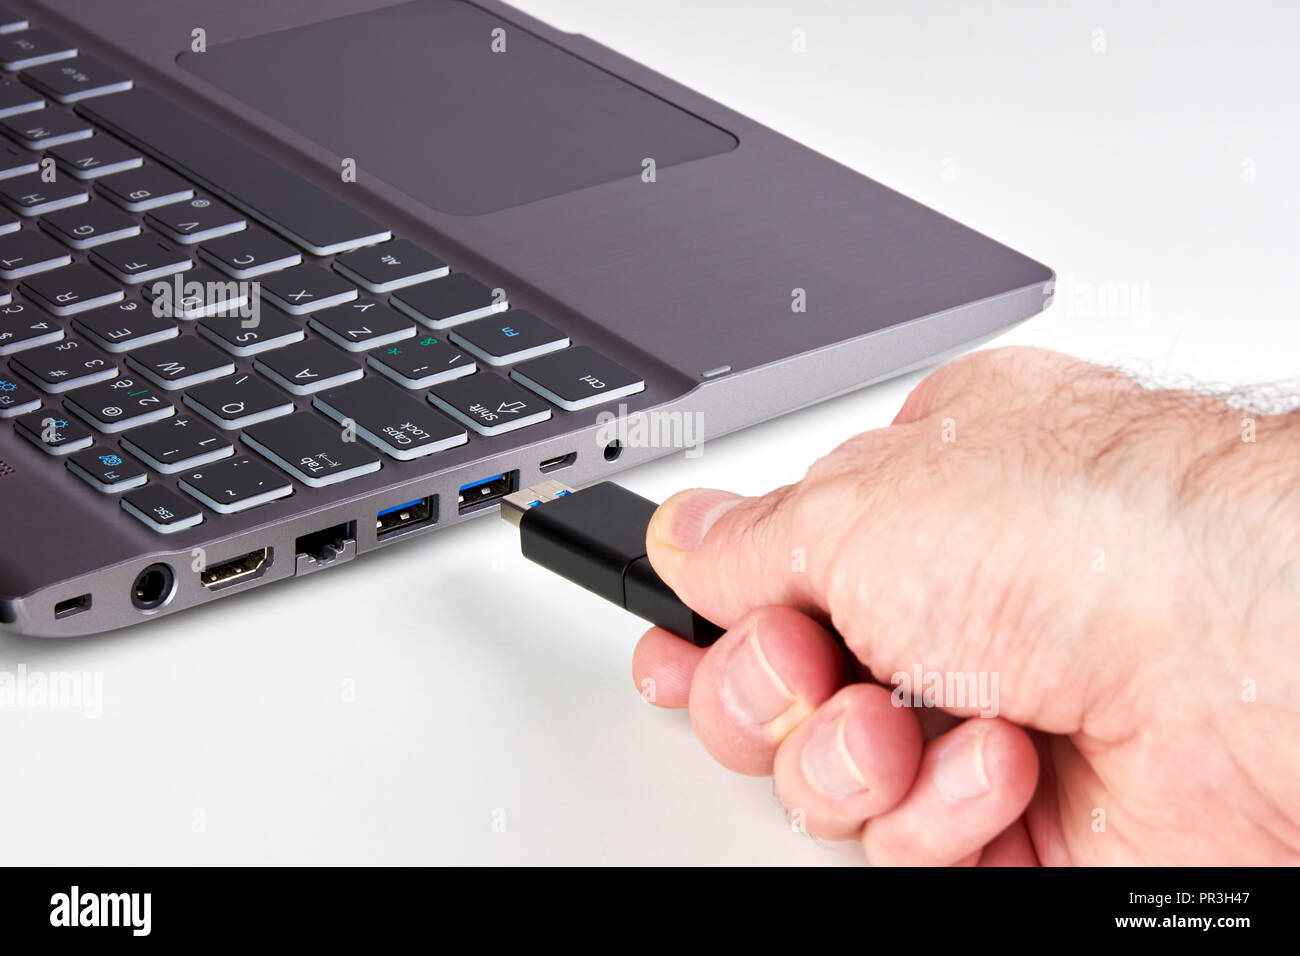 Hand of a man plugging a black USB Flash drive into a silver laptop port with a black keyboard. On a white background. Stock Photo